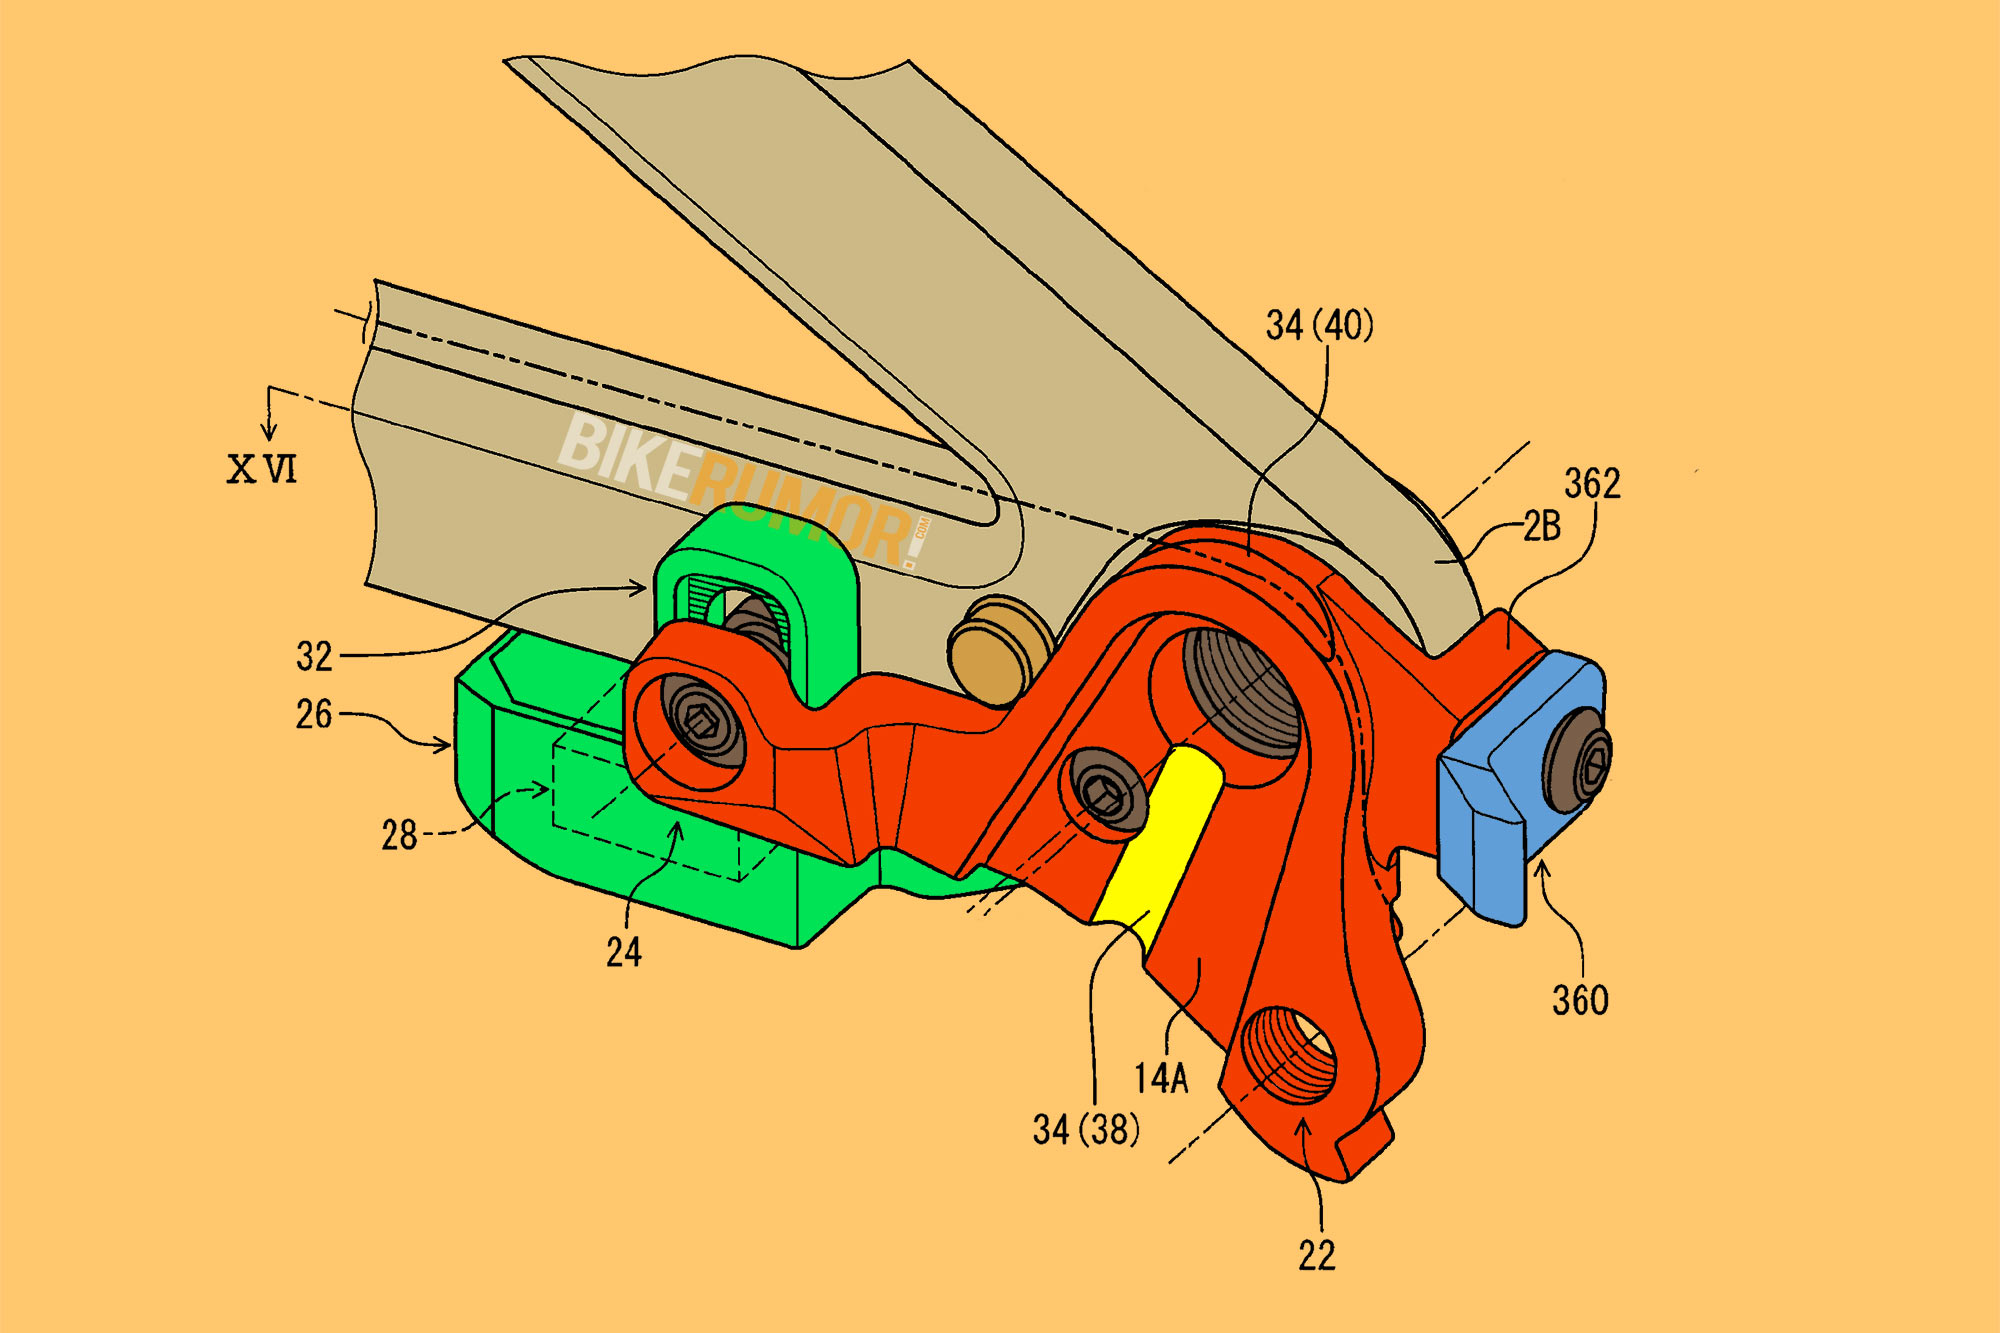 Patent Patrol: Shimano Patent is a New standard Bracket Apparatus for Derailleur Mounting, colorized